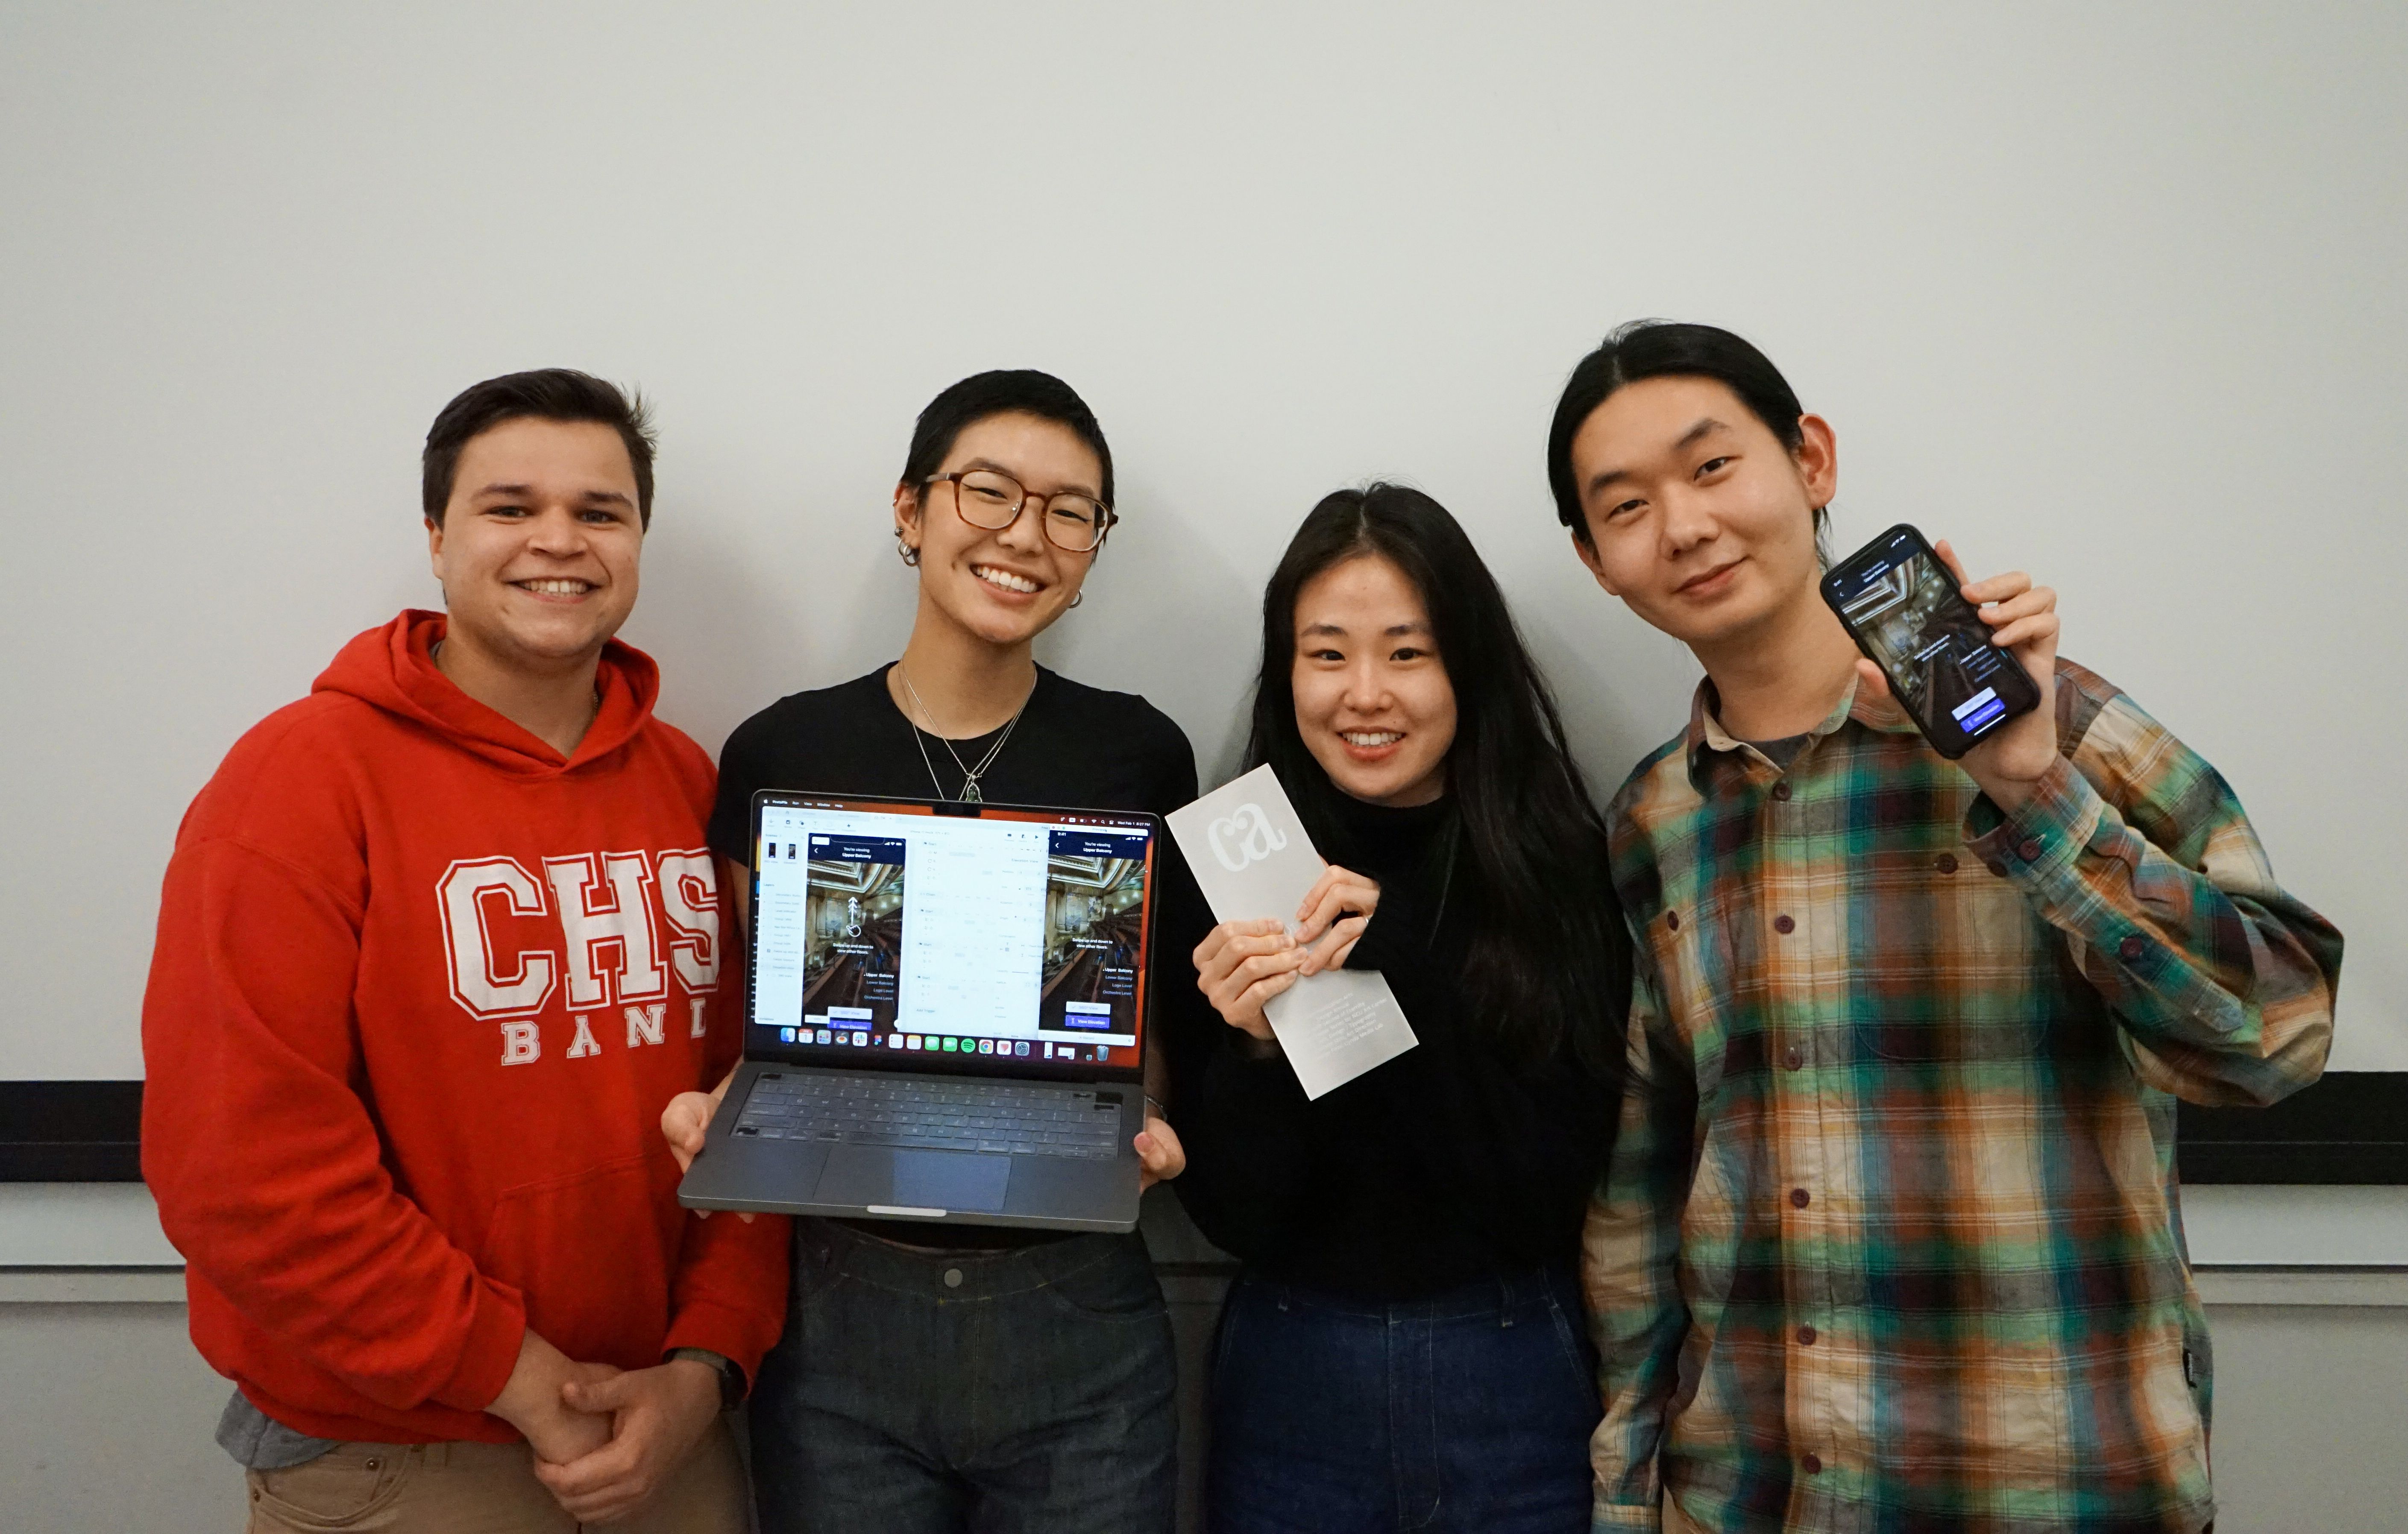 CA winner students with project called ticketmaster